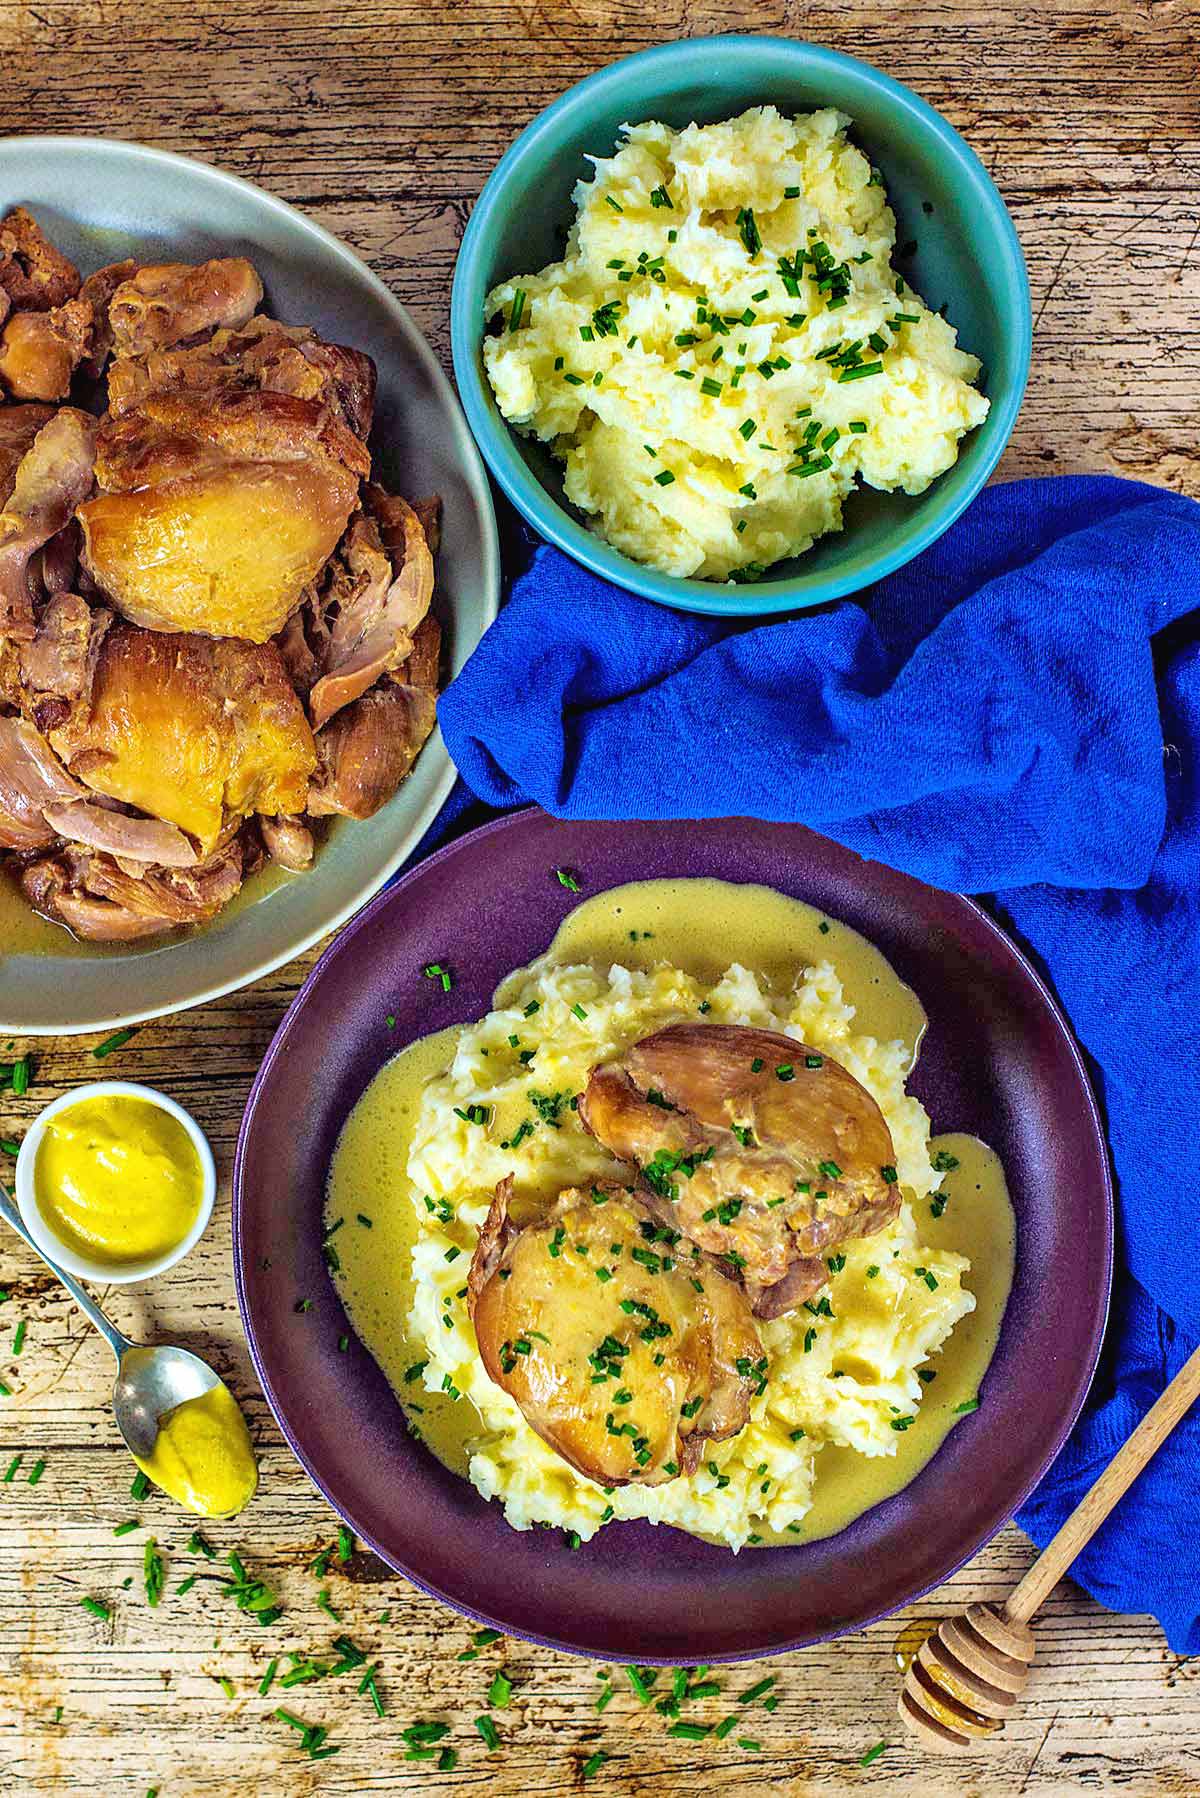 A bowl of cooked chicken thighs and mash potato in a creamy sauce next to bowls of more chicken and mashed potato.